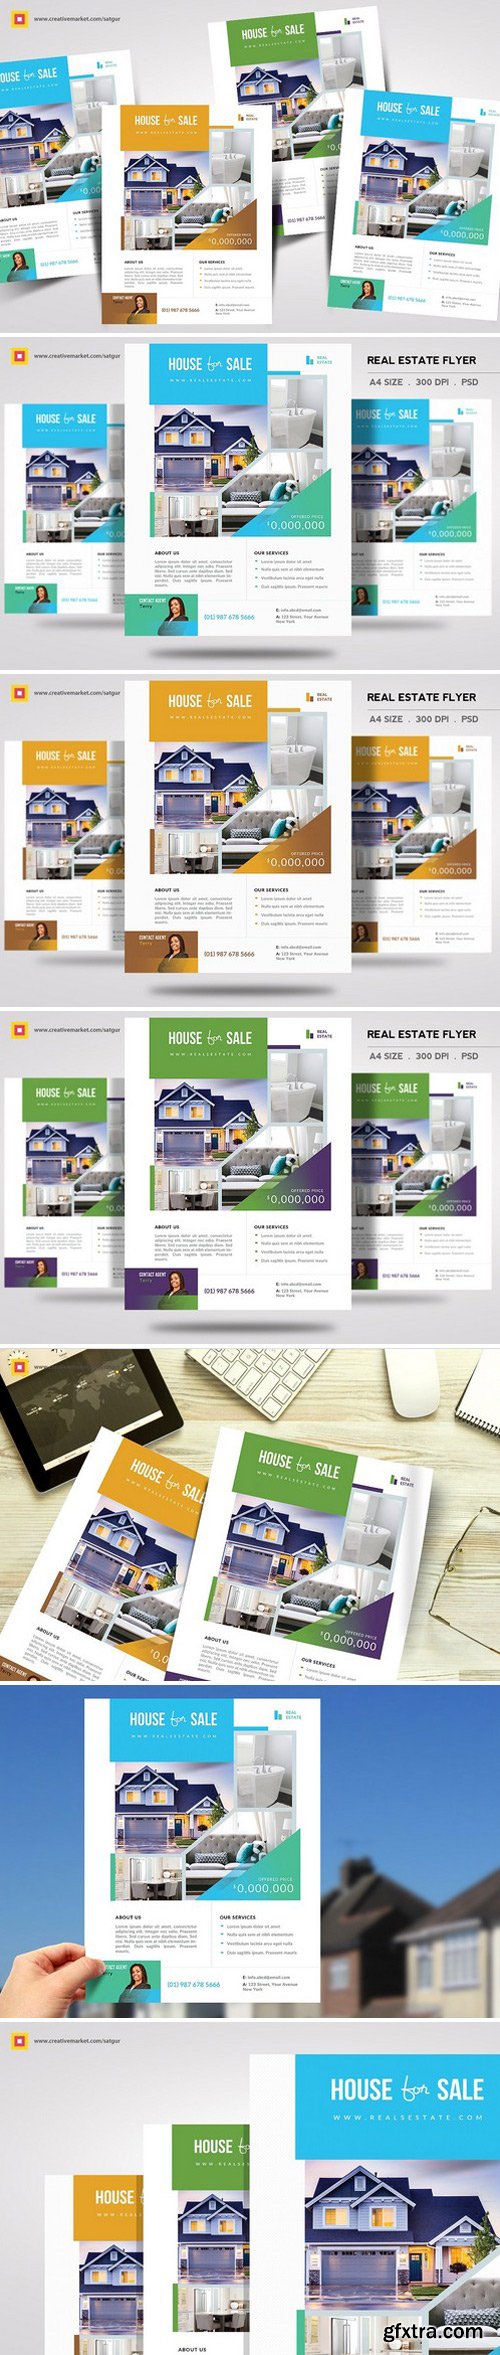 real-estate-flyer-template-free-download-of-free-real-estate-flyer